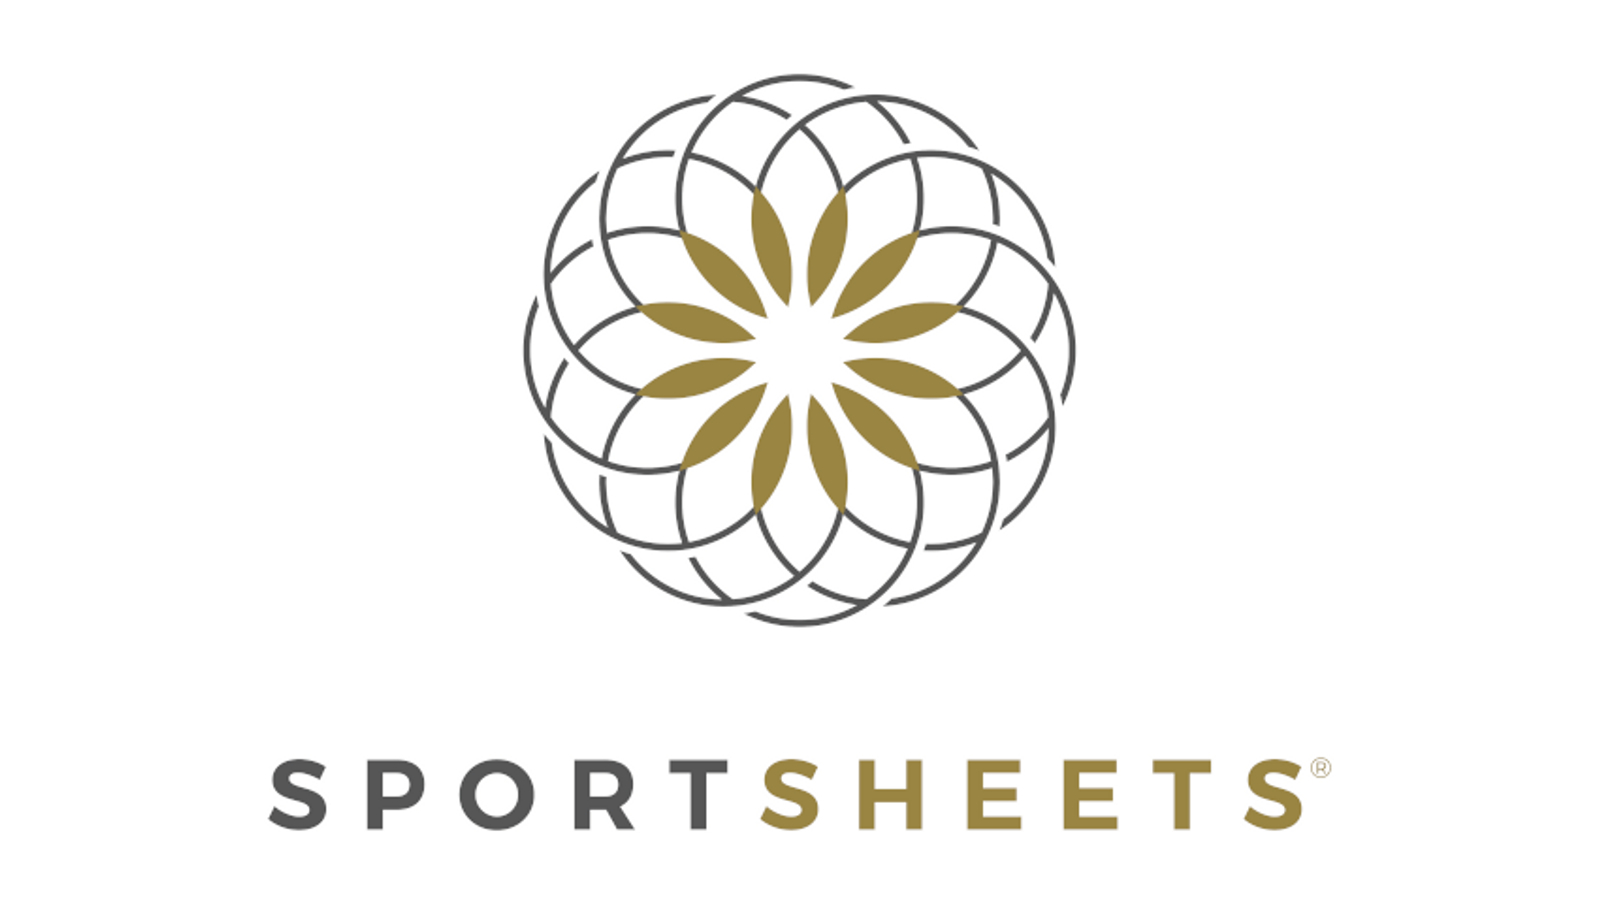 Sportsheets & Windsor Dist. Partner to Expand Presence in AU, NZ